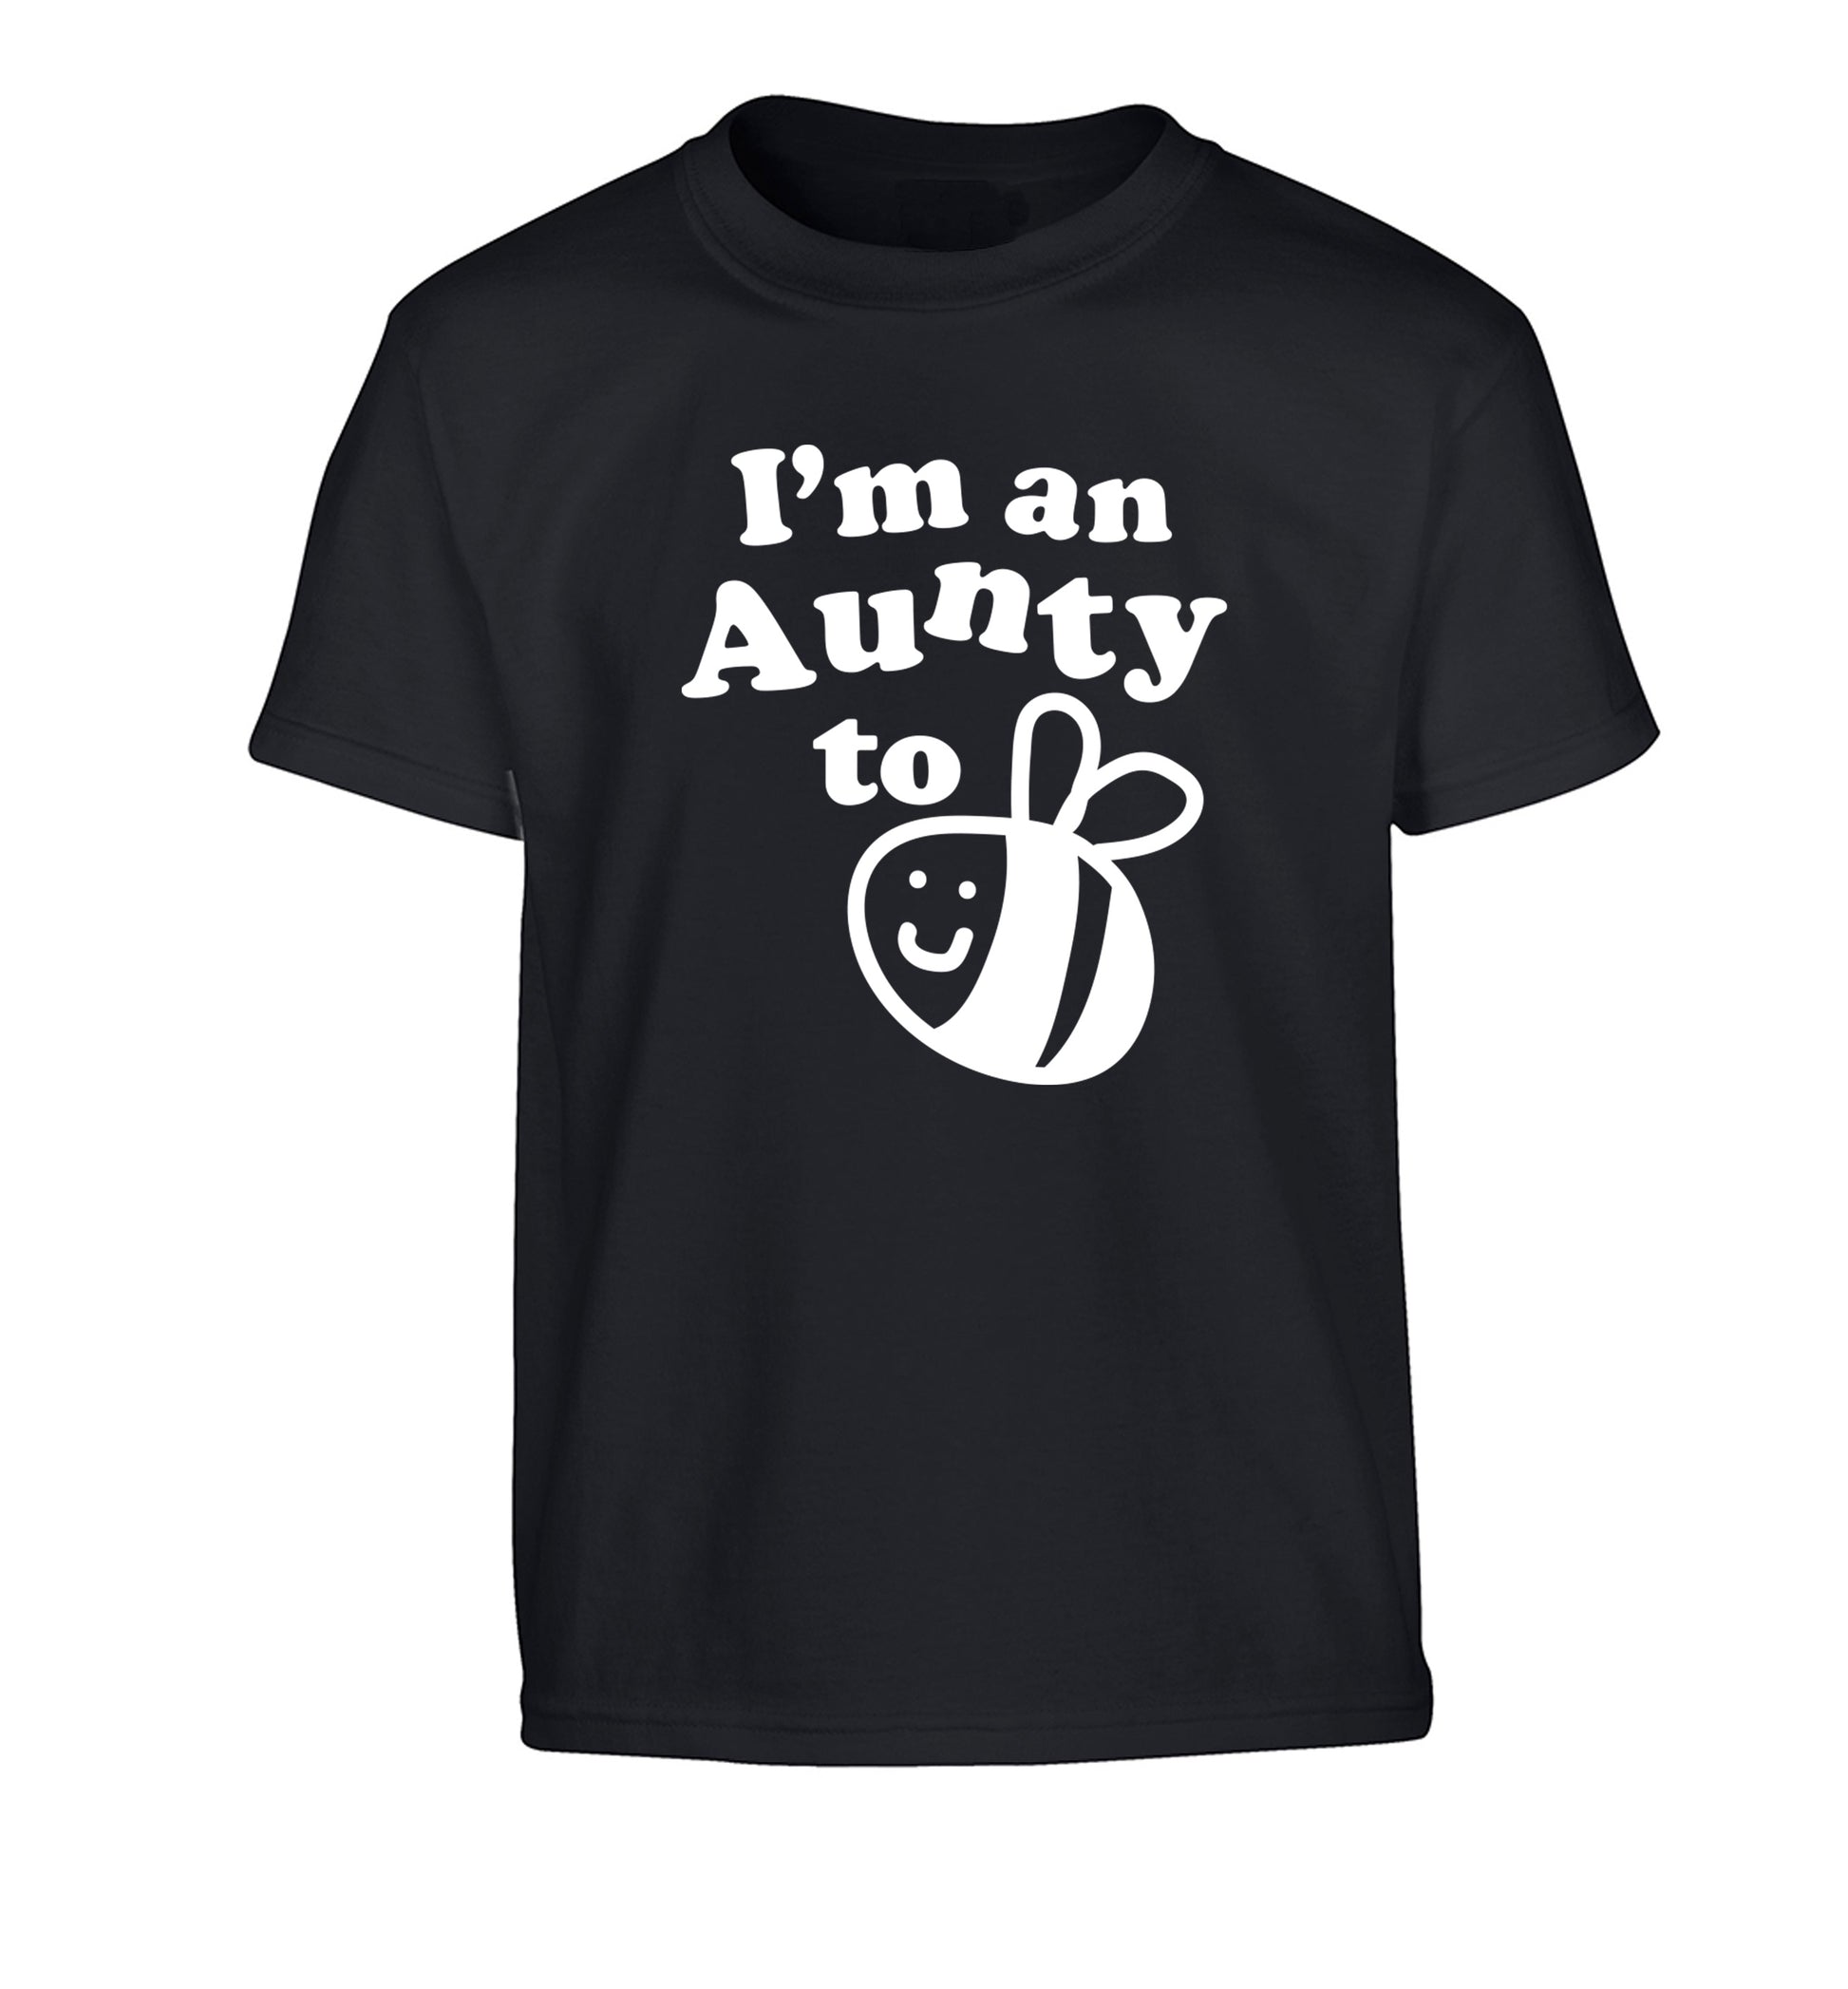 I'm an aunty to be Children's black Tshirt 12-14 Years